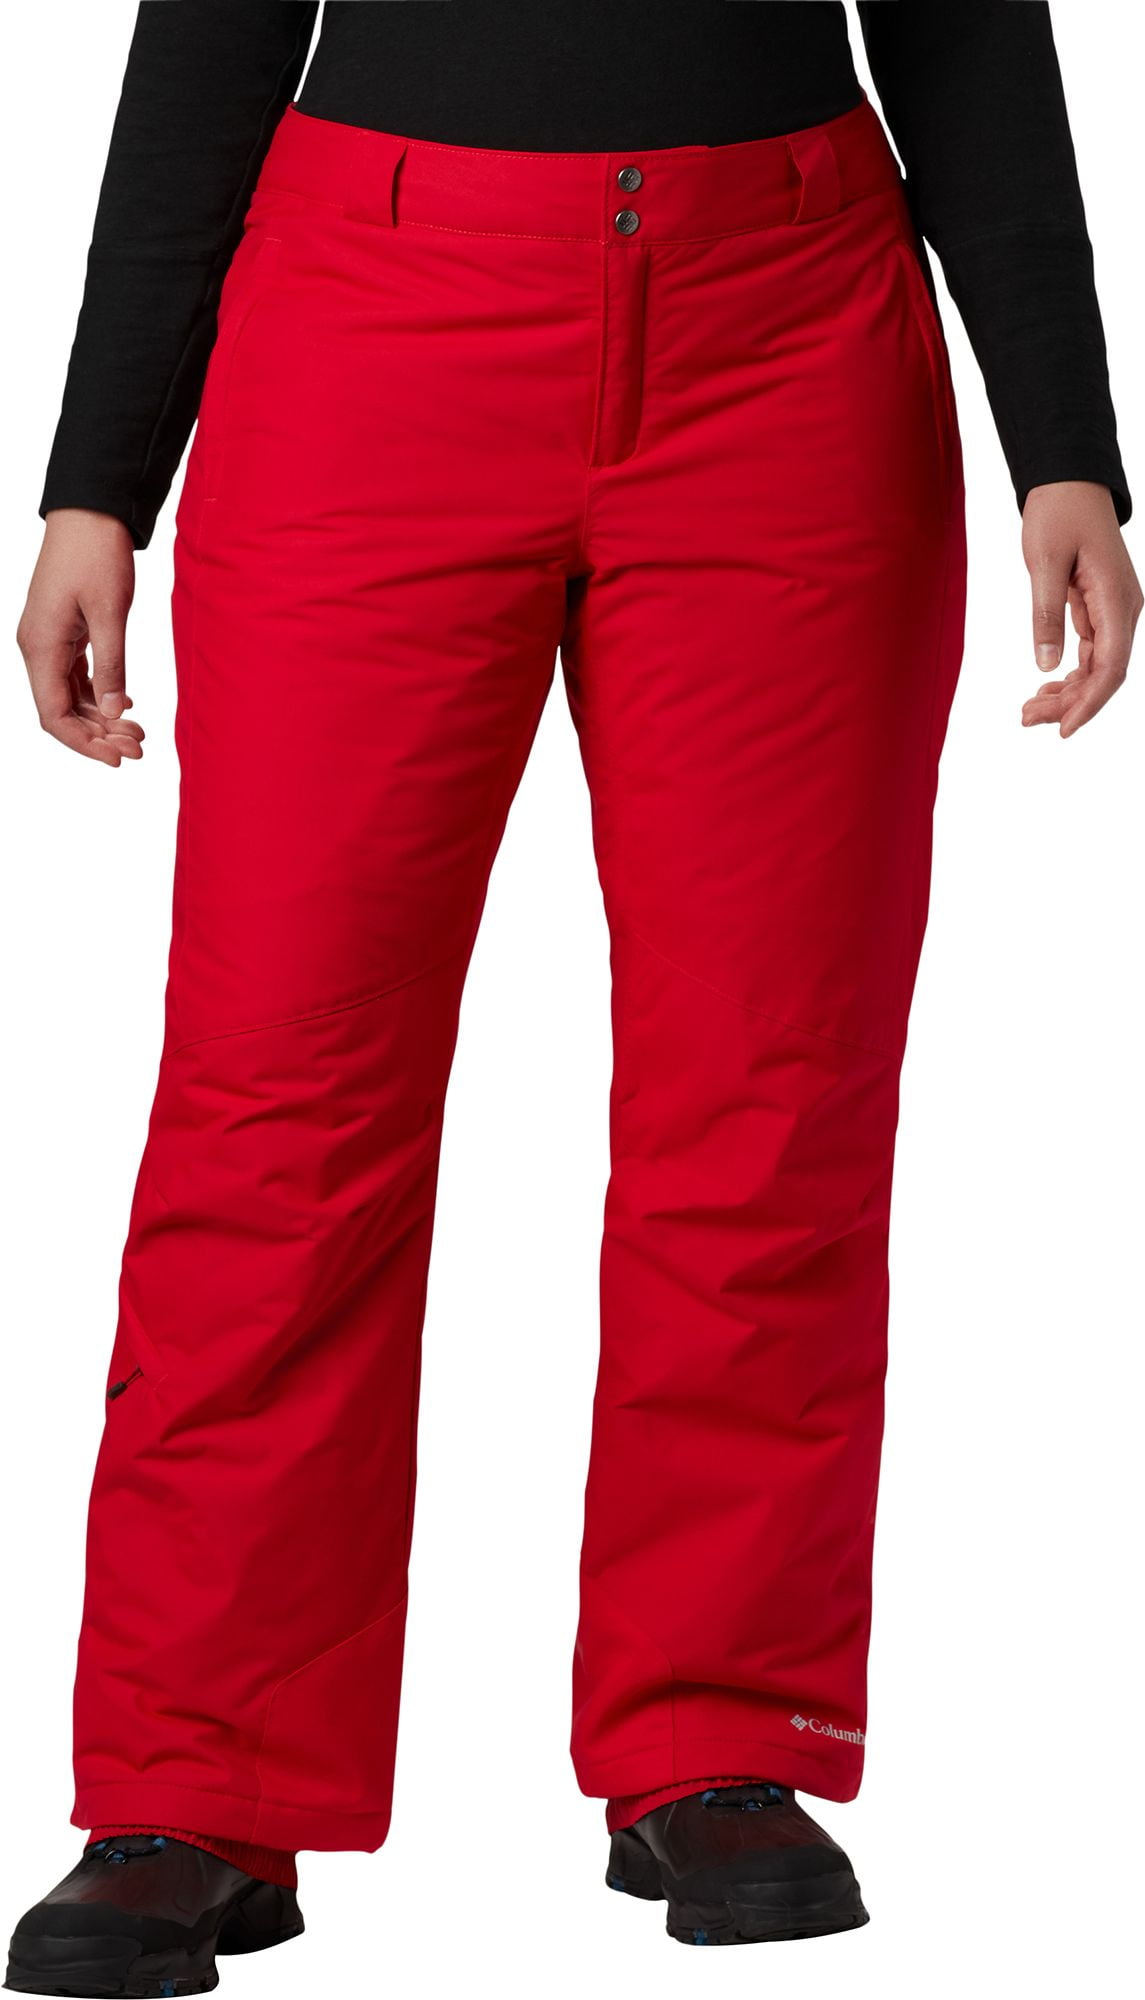 Columbia Bugaboo Snow Pant for Women at Sporting Life Canada